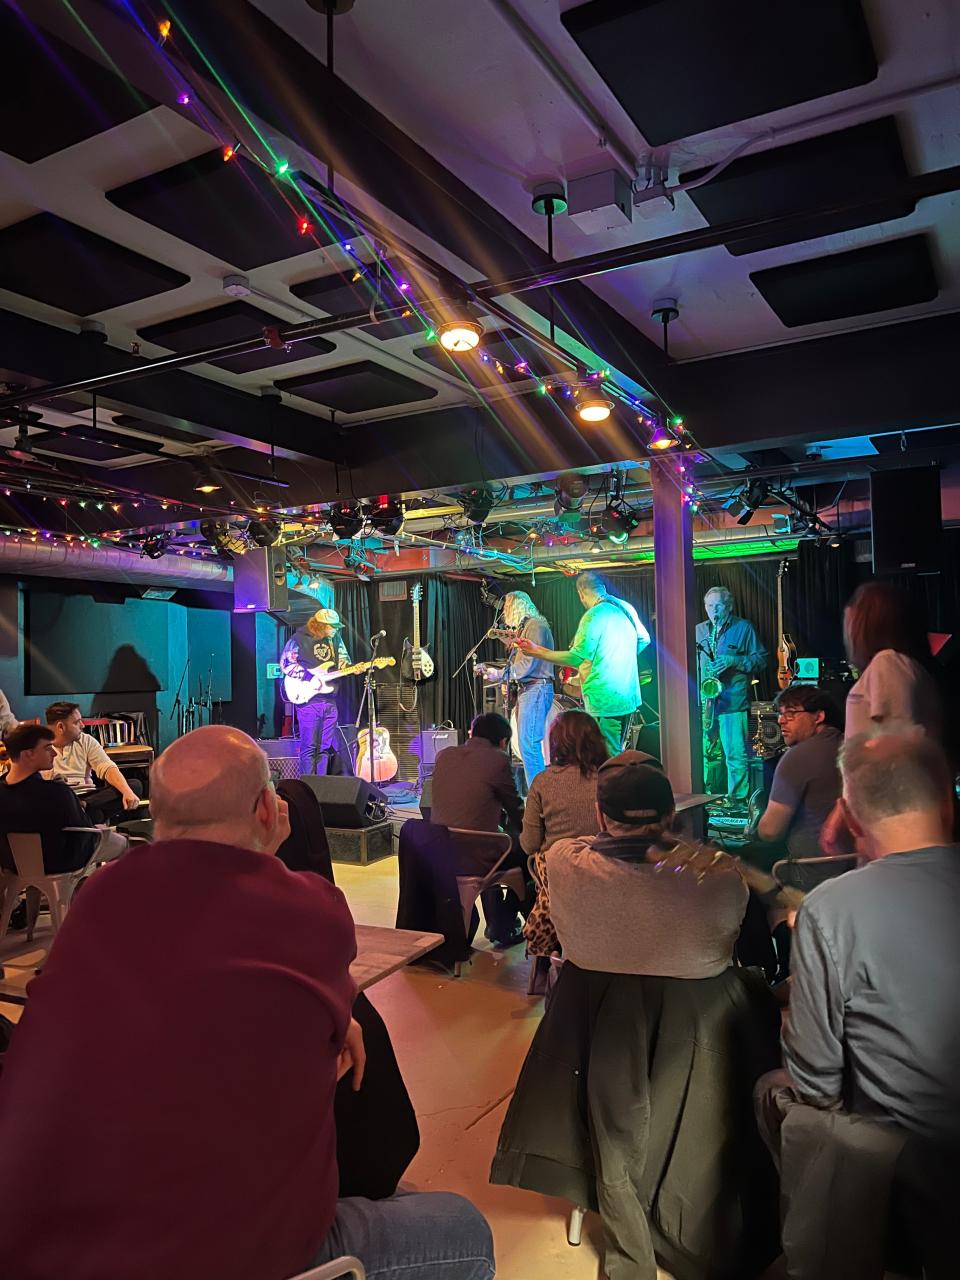 Puck Live by Great Barn is currently open Wednesday through Saturday, offering a schedule of events, including trivia night, open mic night and live music.